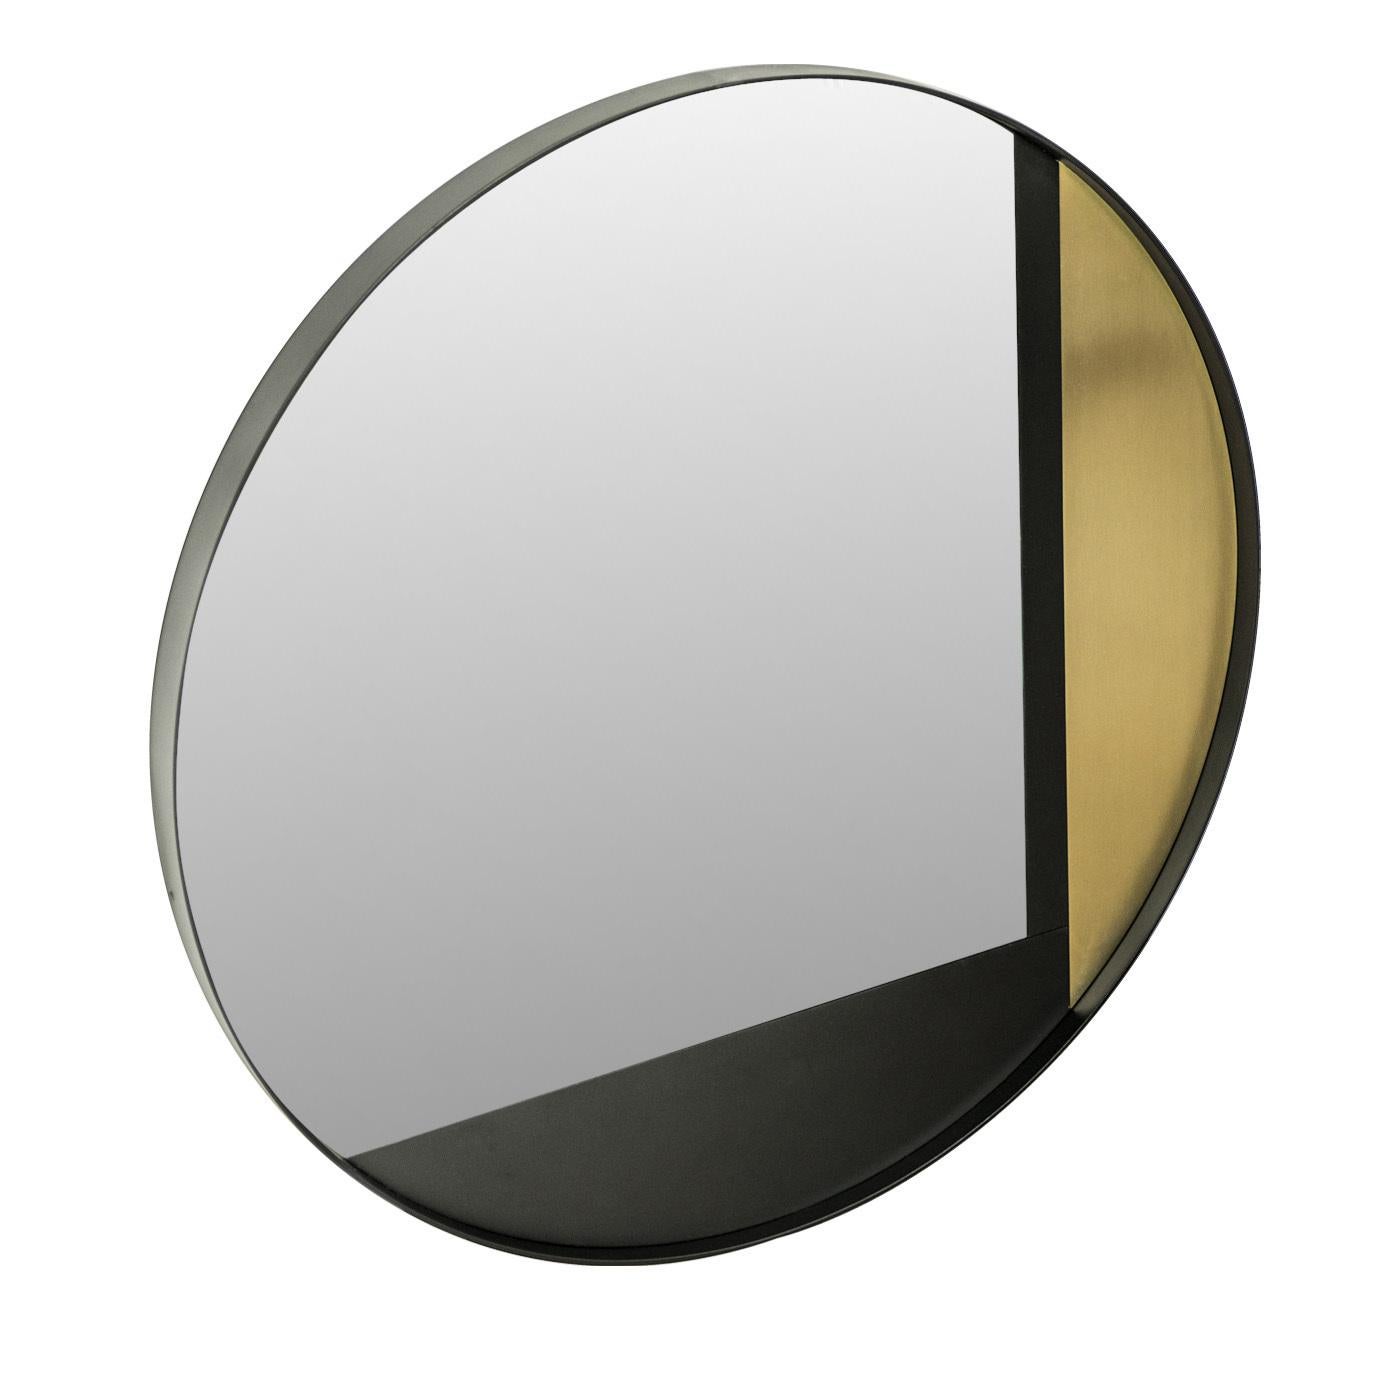 This exquisite round wall mirror is framed in metal and decorated with geometric inserts in wood and solid brass. The round shape harmoniously coexists with the straight lines that cut the mirror making it a contemporary art deco piece.
 